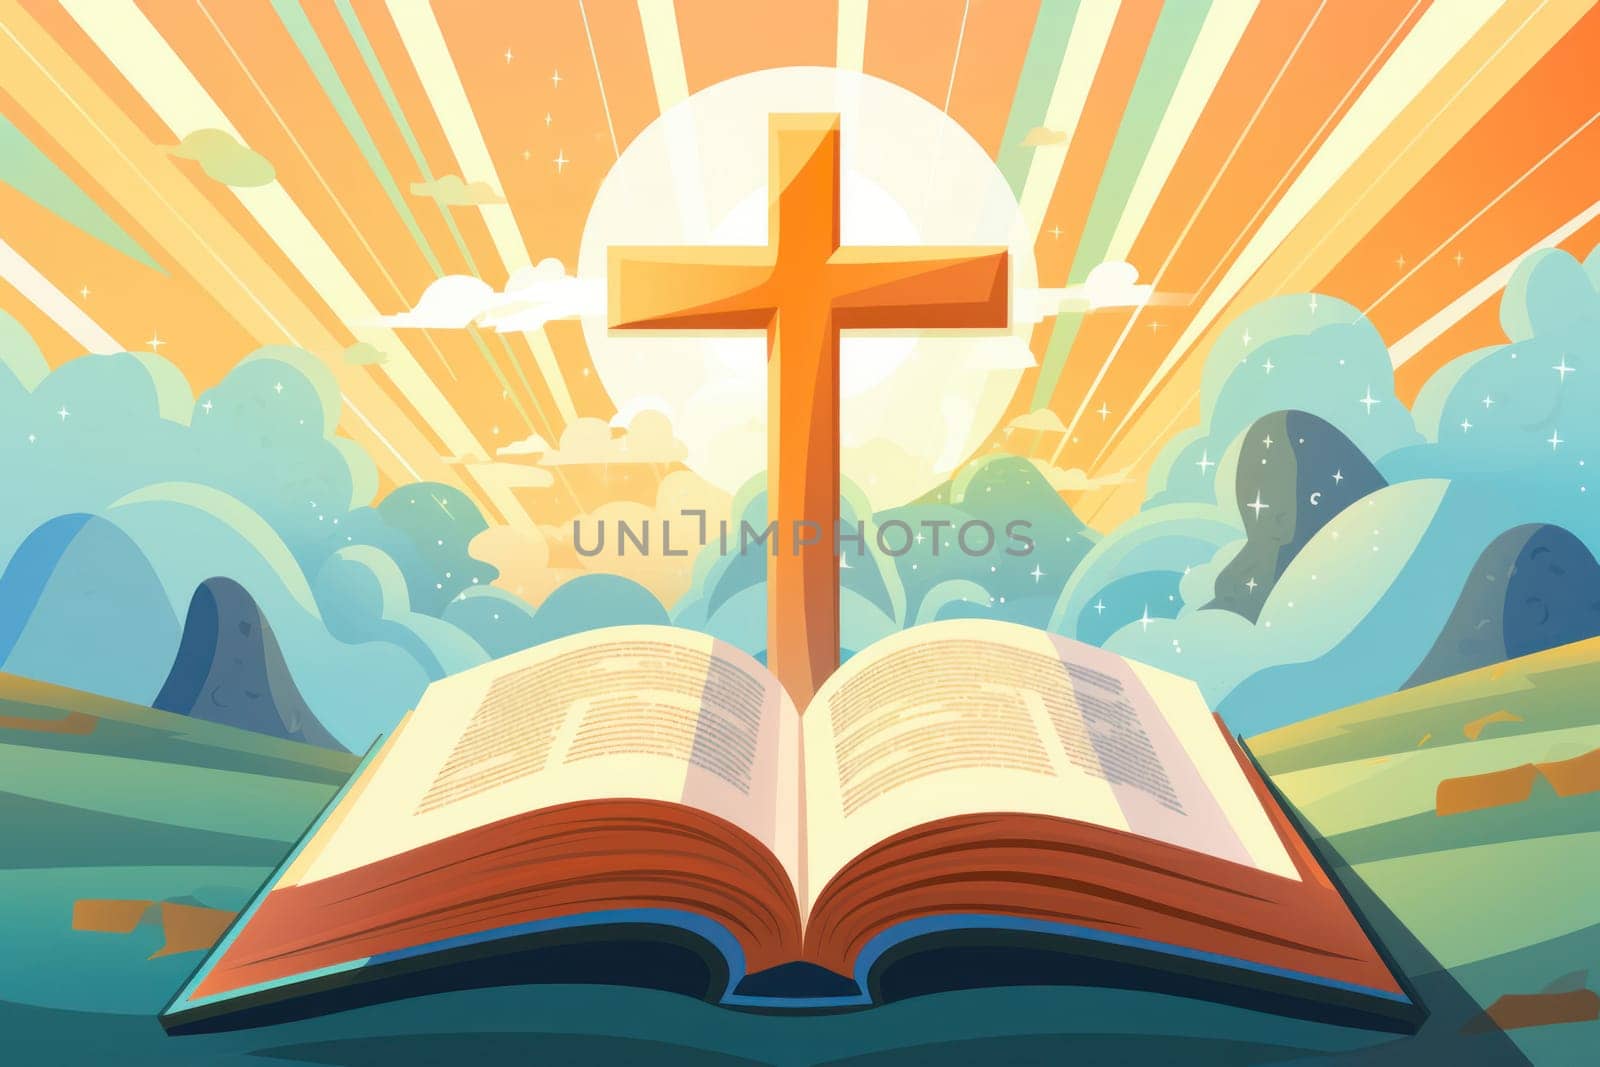 Stylized illustration of an open bible with a cross against a backdrop of radiant sunbeams